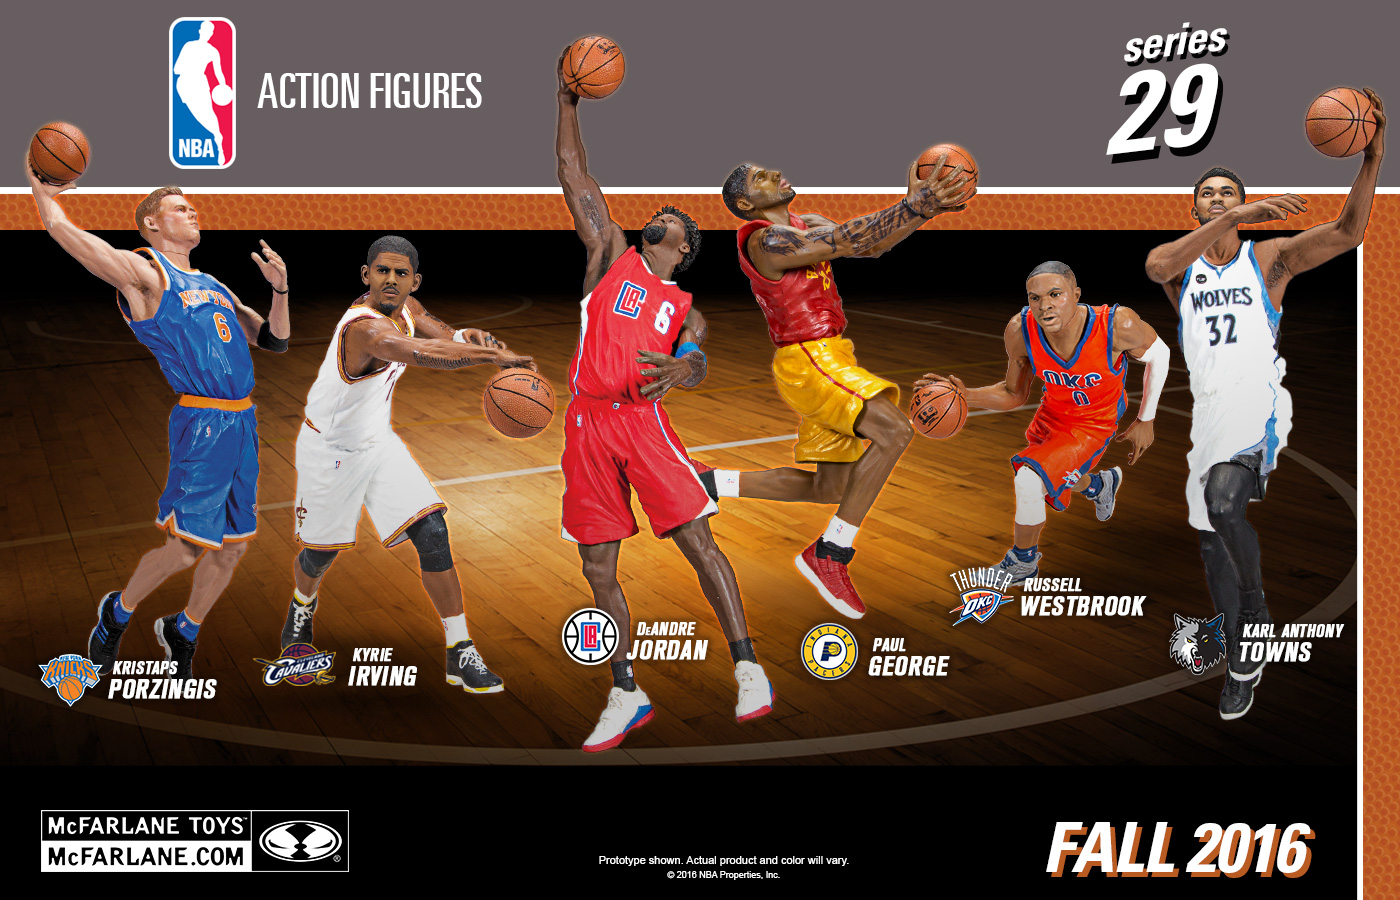 Another All-Star Line-Up for NBA Series 29!